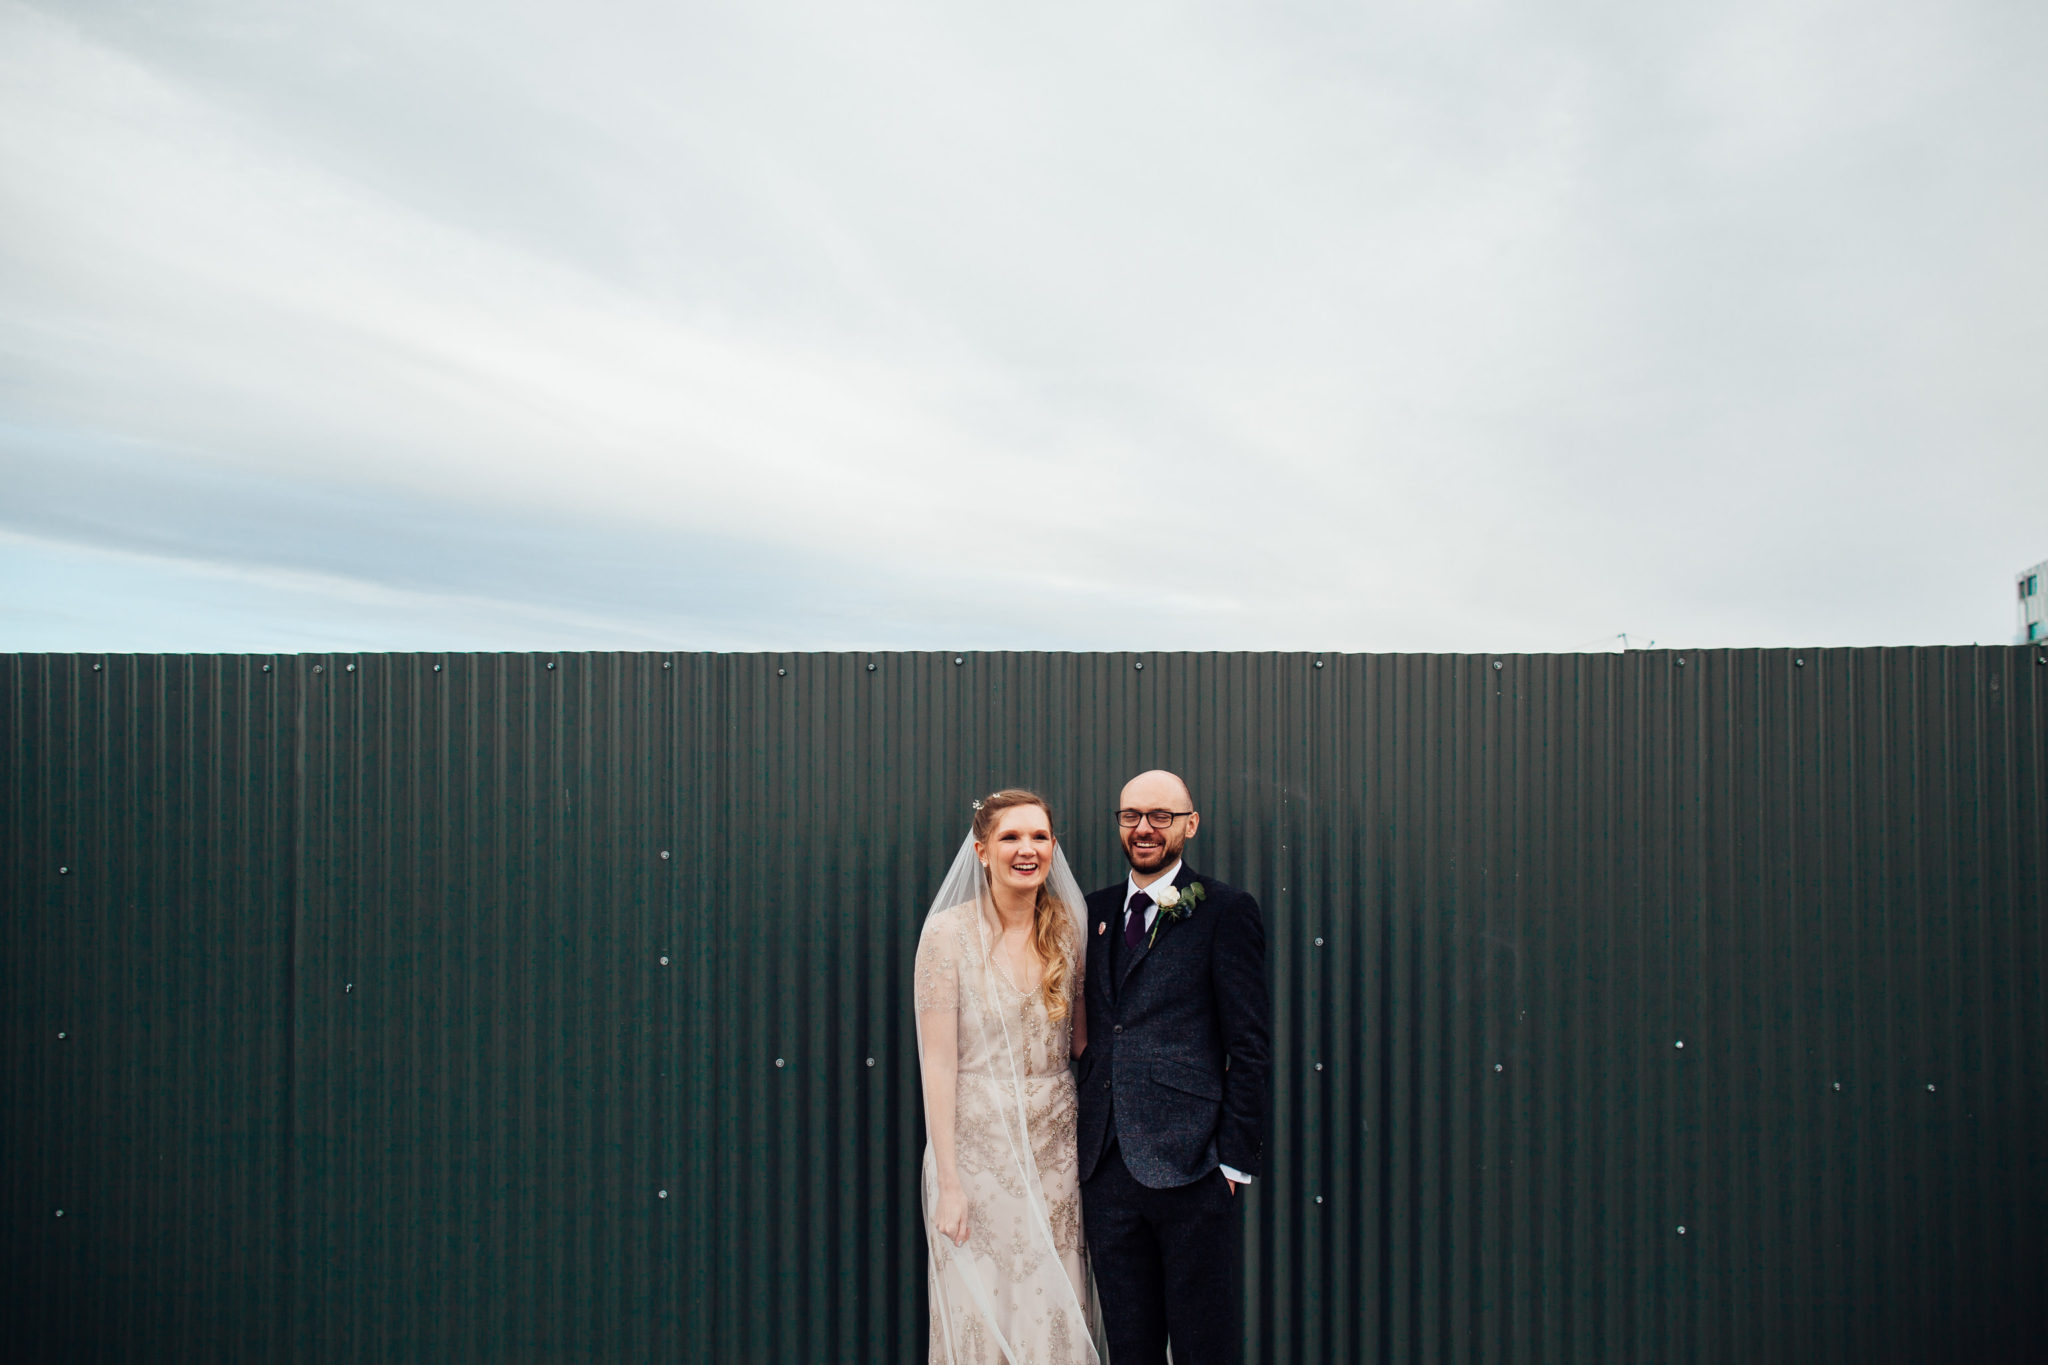 BRIDE AND GROOM AUTUMN WEDDING AT ONE FRIENDLY PLACE COUPLES PORTRAITS WITH PROPS AND DECORATION ROOFTOP OF WAREHOUSE WEDDING IN LONDON